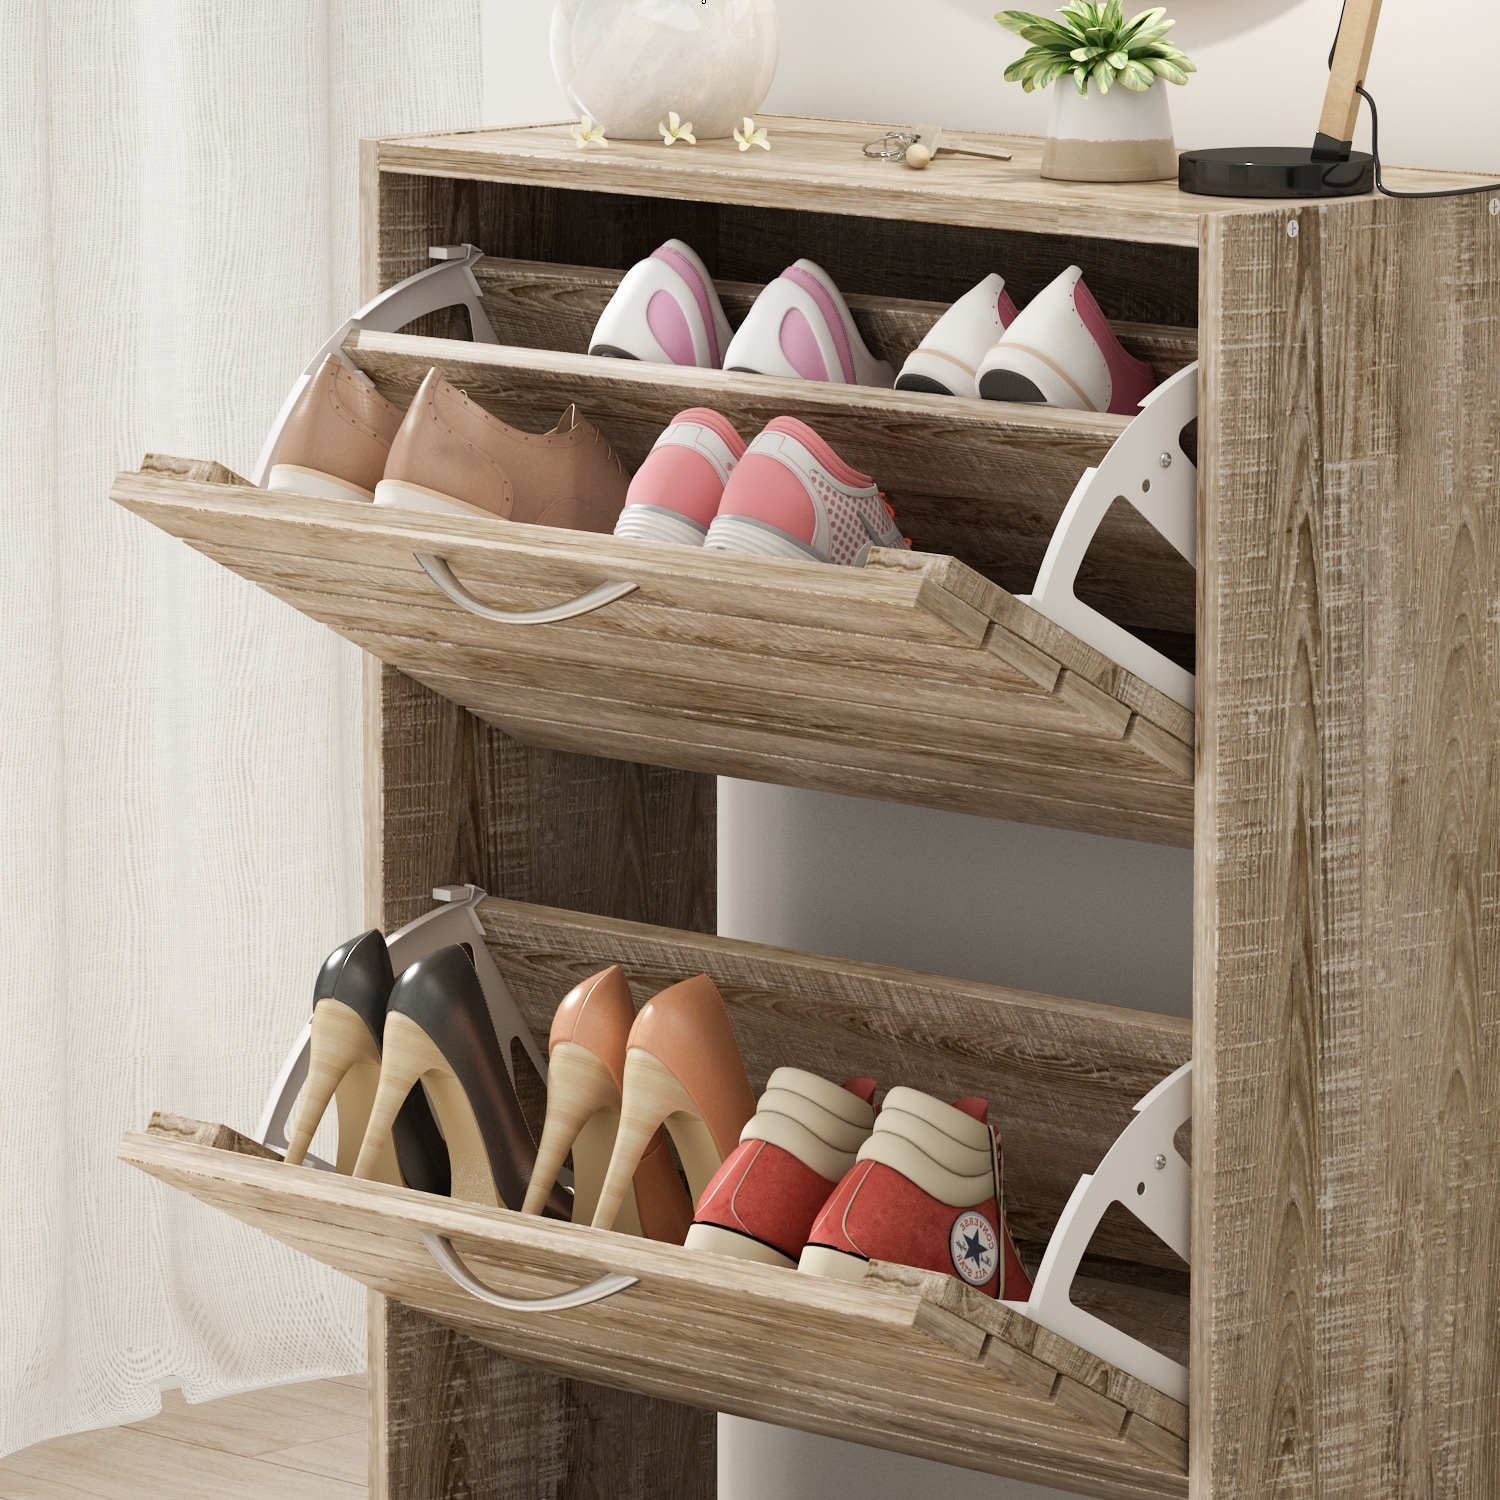 https://ak1.ostkcdn.com/images/products/is/images/direct/18aef978ced6a8b05a402ba907ed6554851ede83/Shoe-Cabinet-with-Flip-Drawer-for-Entryway-Rack-Storage-Organizer.jpg